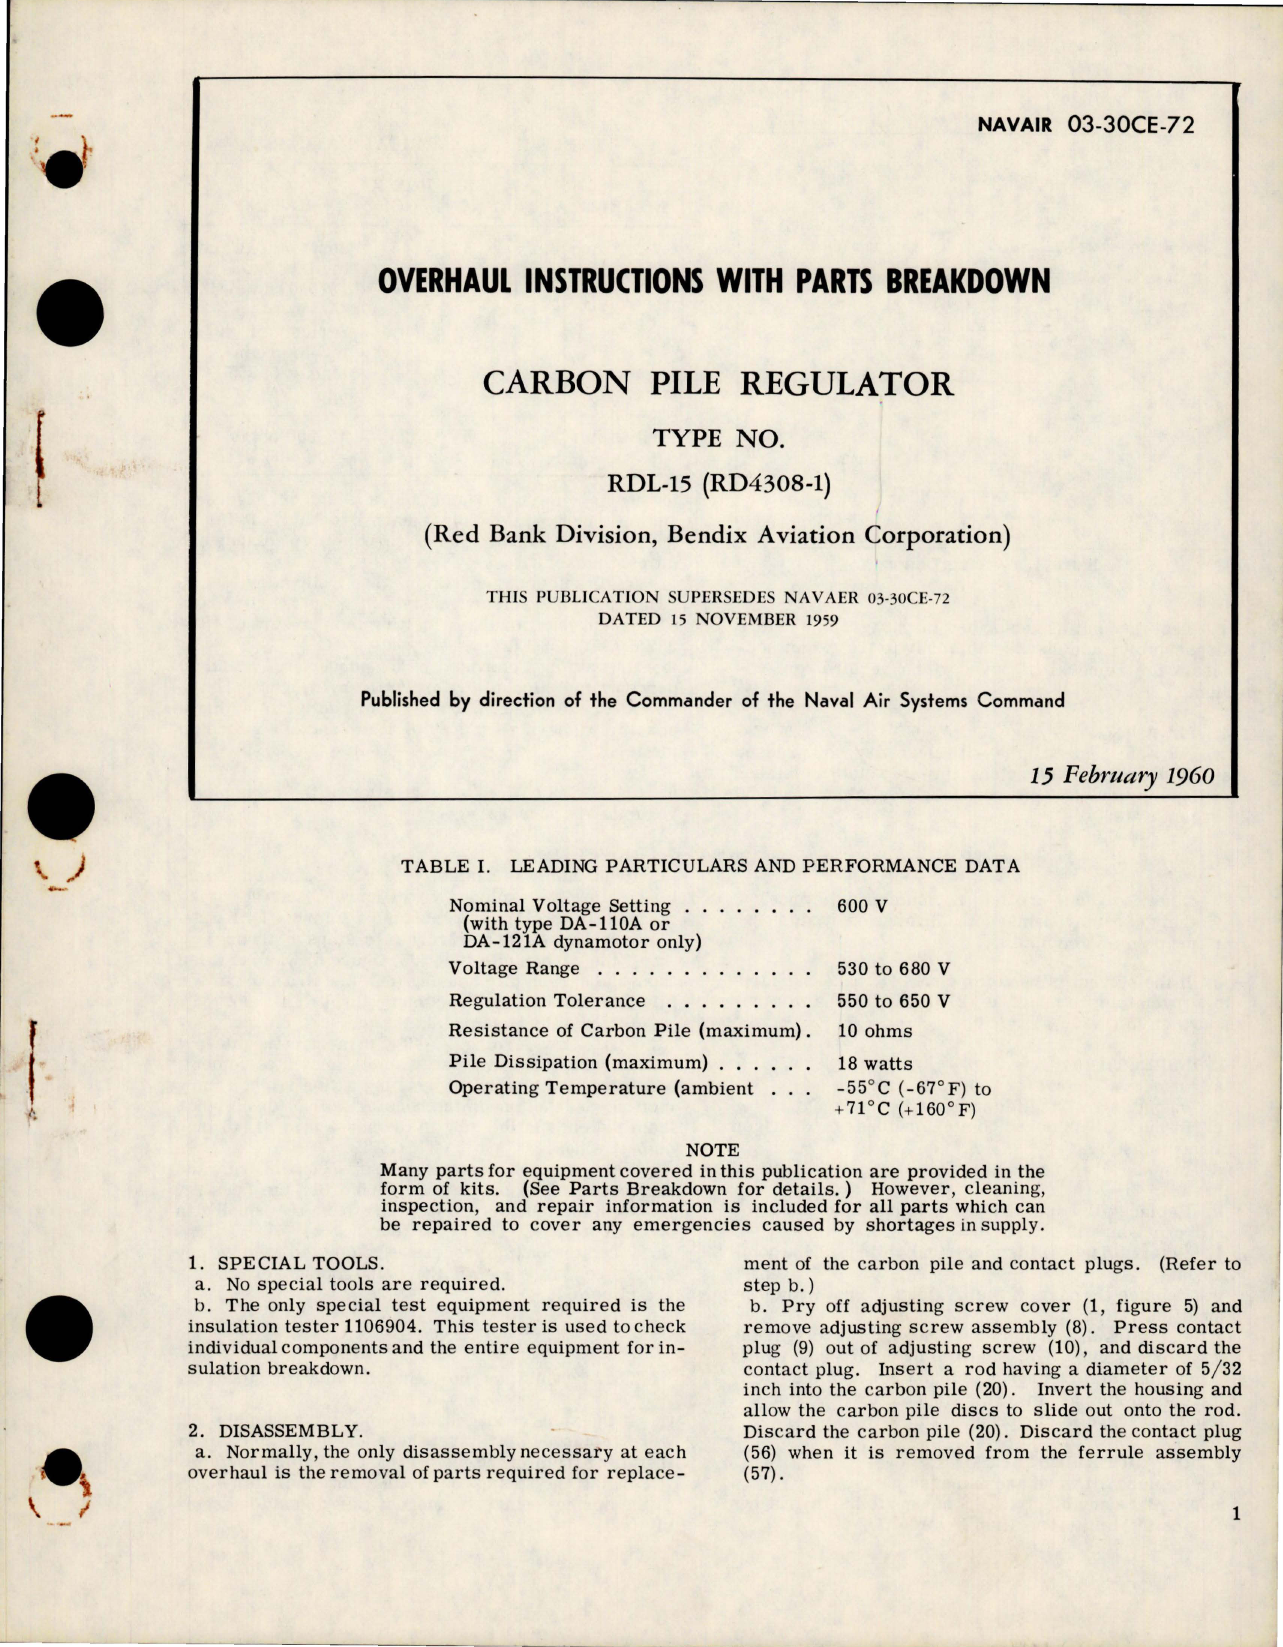 Sample page 1 from AirCorps Library document: Overhaul Instructions with Parts Breakdown for Carbon Pile Regulator - Type RDL-15 - RD4308-1